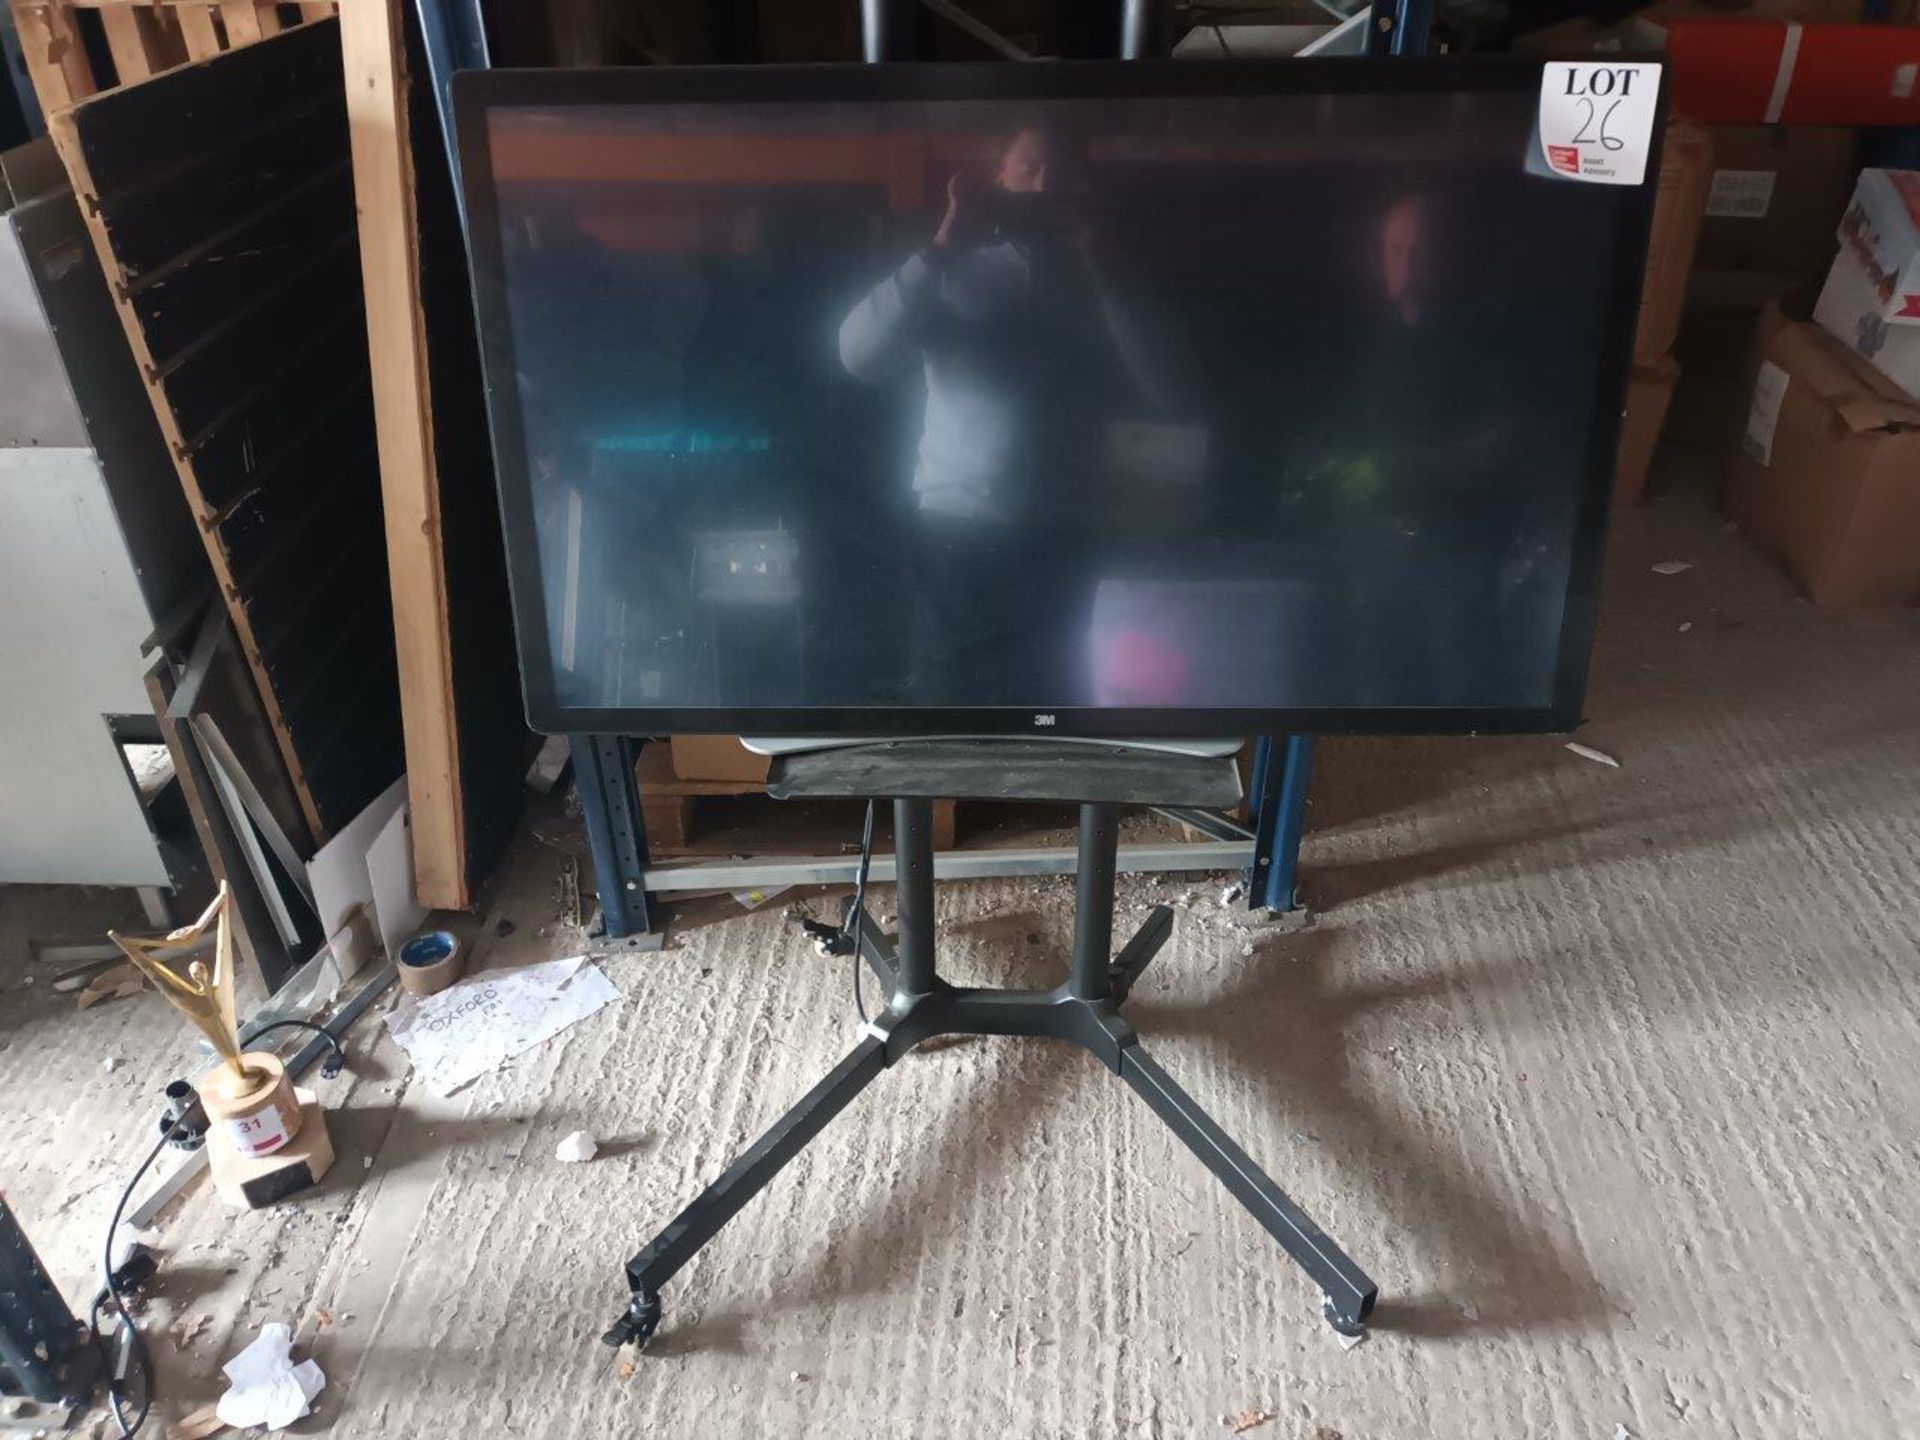 3M C4667PW 46" LCD display unit on trolley stand